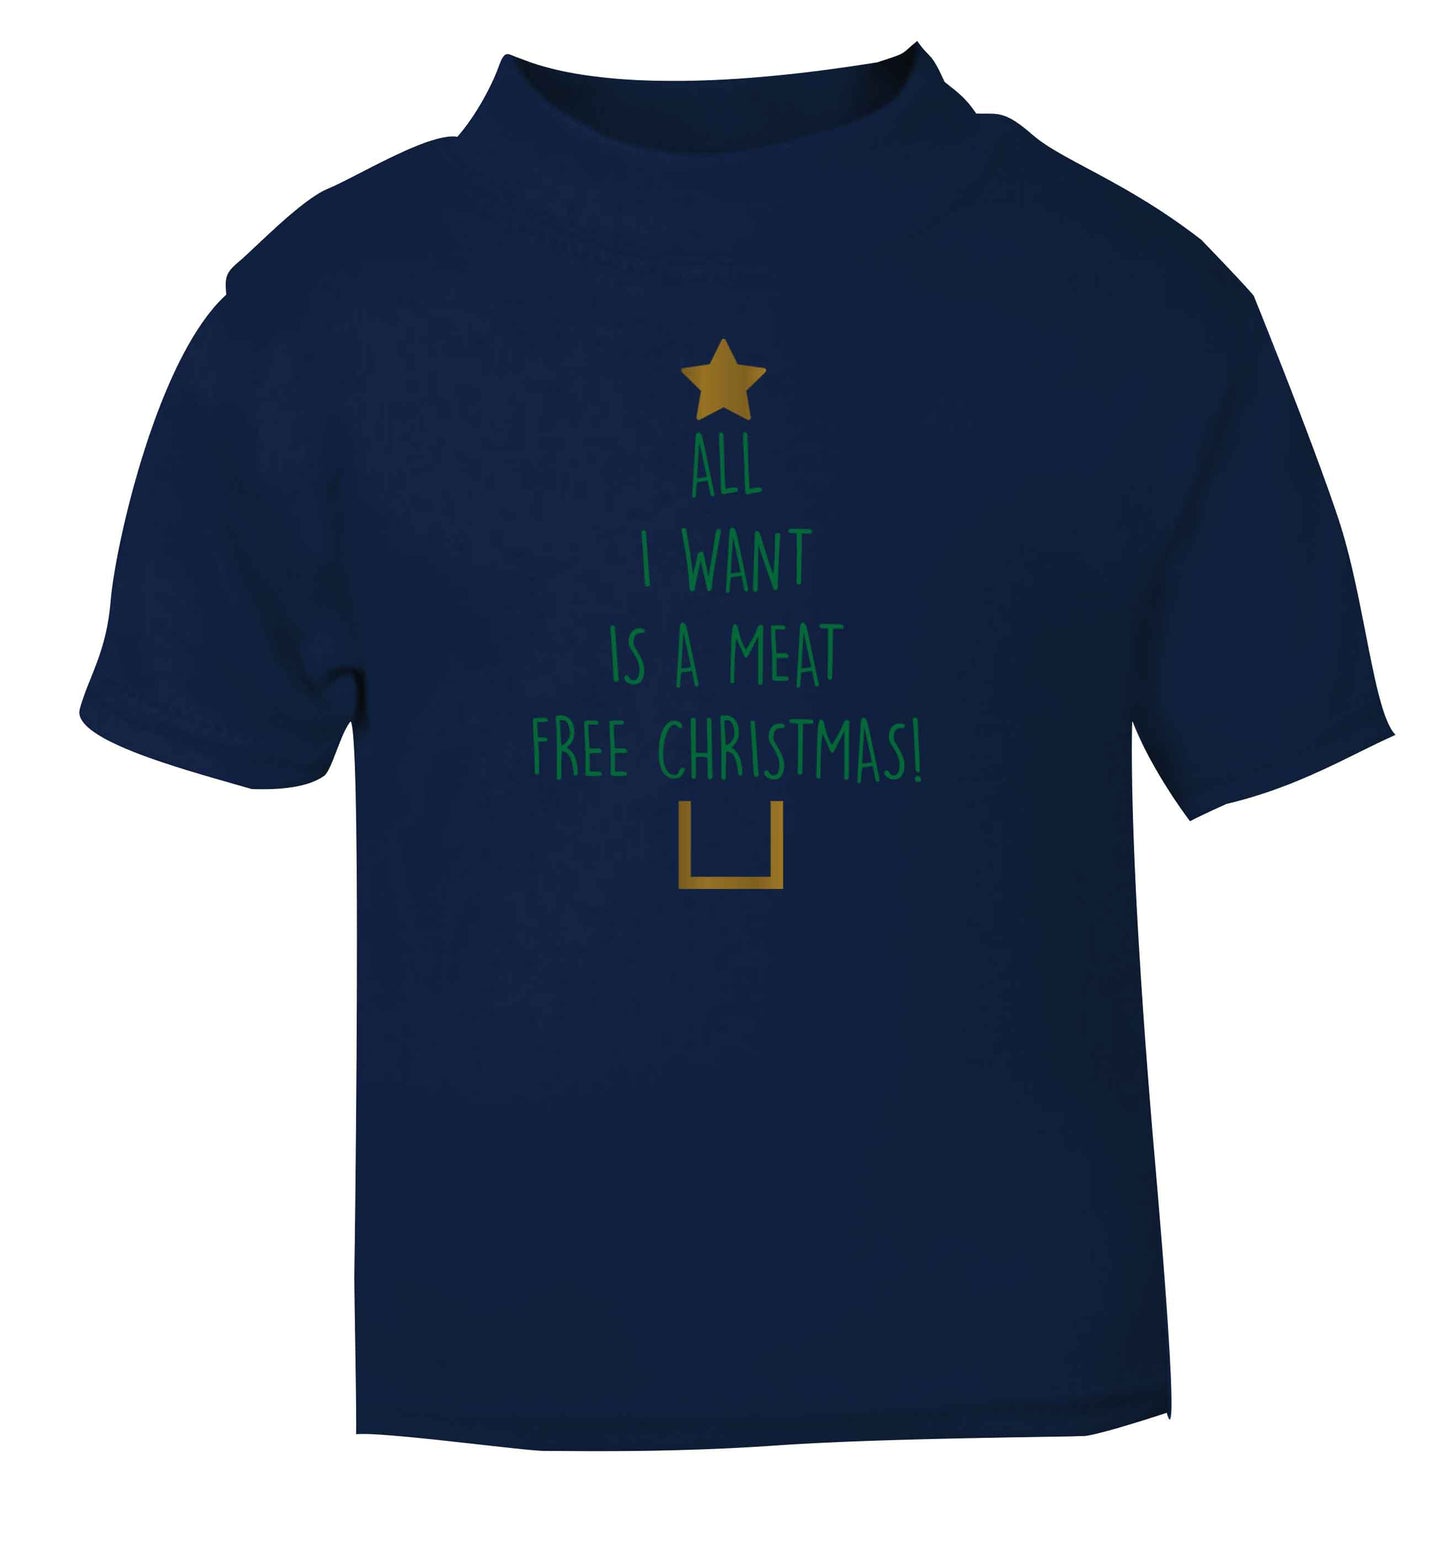 All I want is a meat free Christmas navy Baby Toddler Tshirt 2 Years